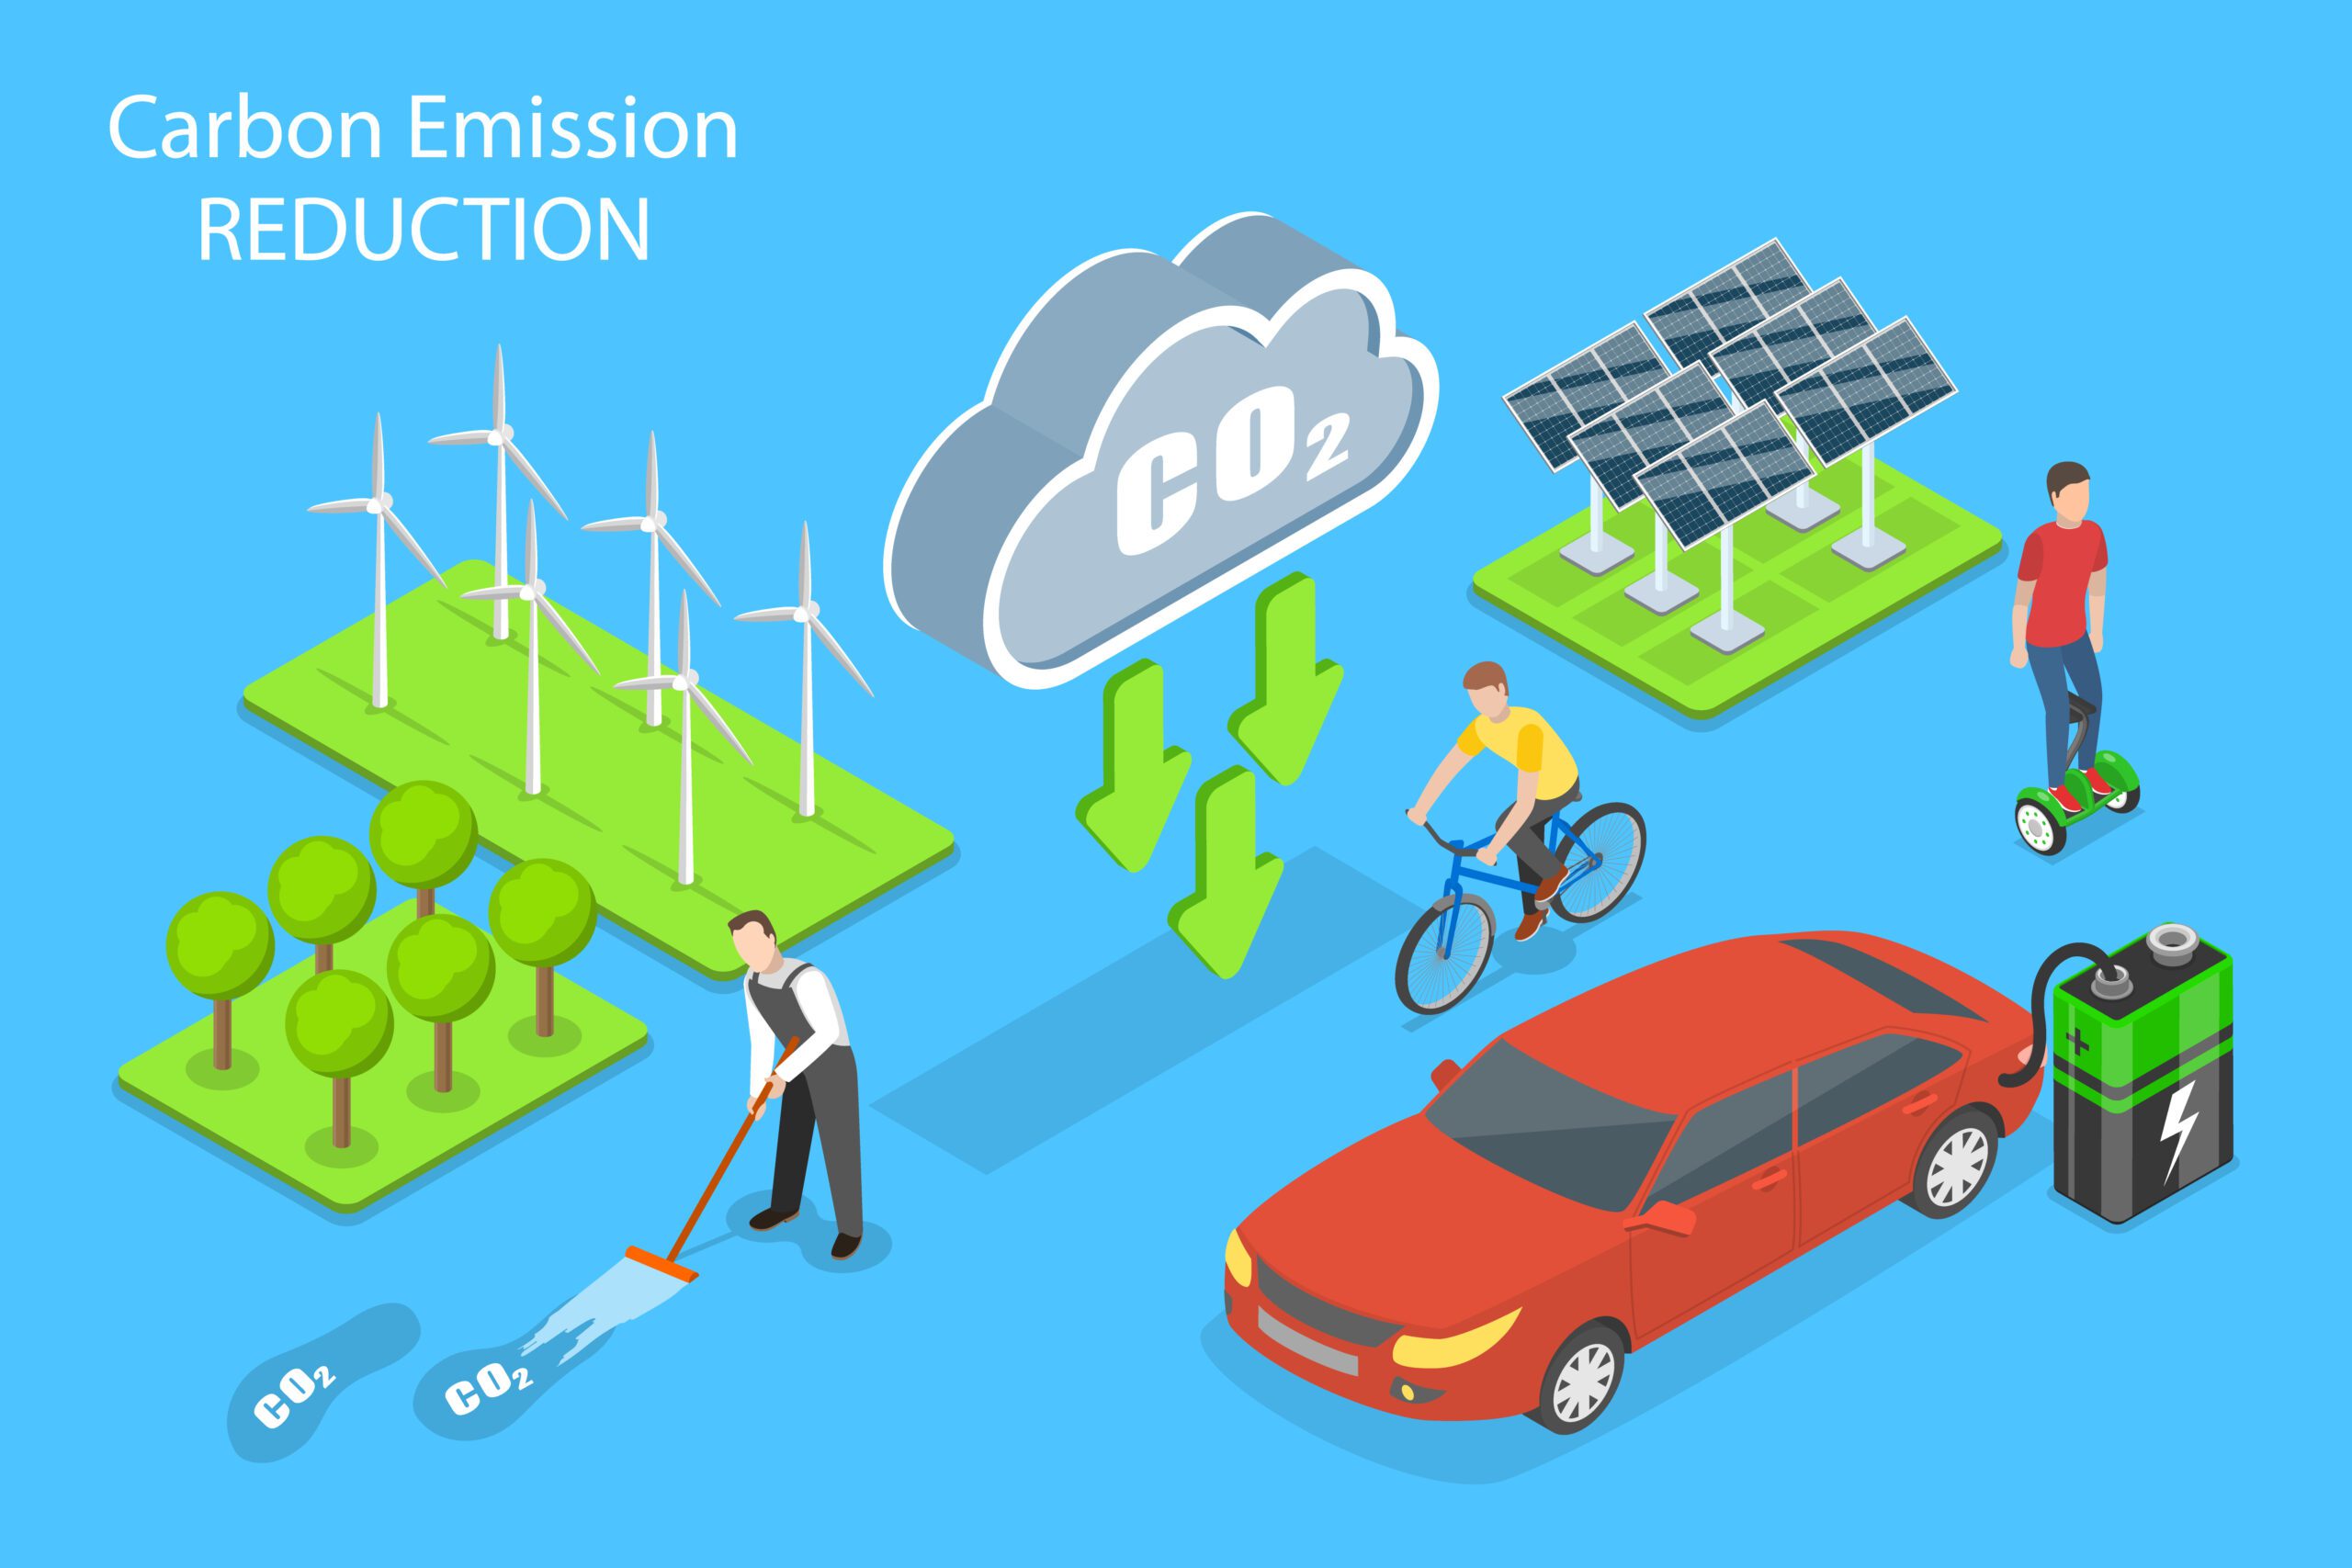 An infographic depicting various ways to reduce carbon emissions.